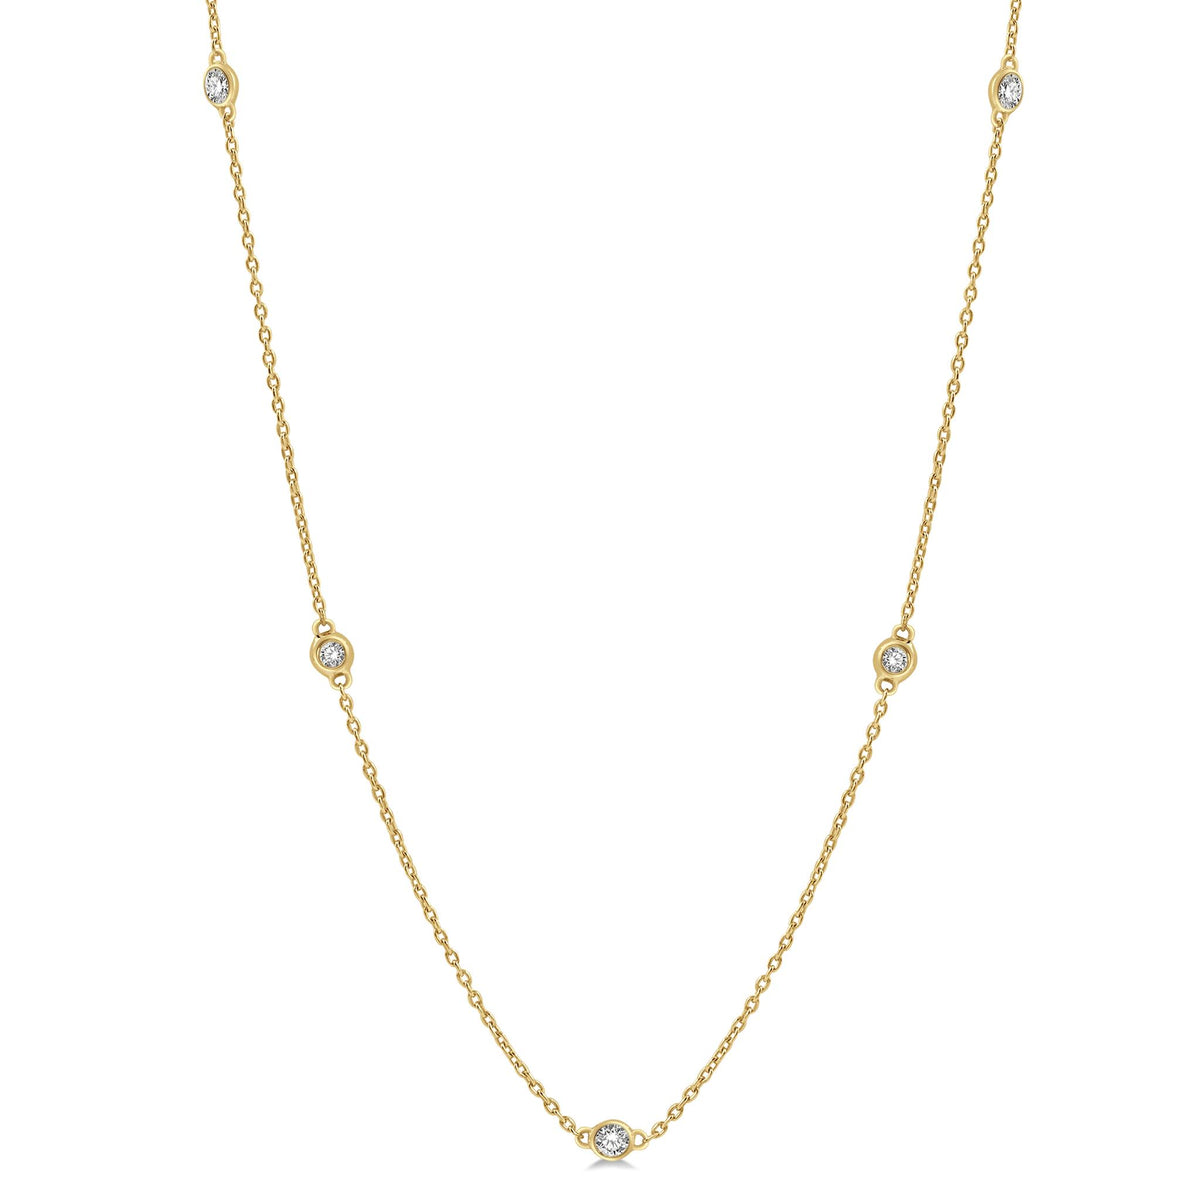 Milestone 14Kt Yellow Gold Diamonds-By-The-Yard Necklace With .50cttw Natural Diamonds